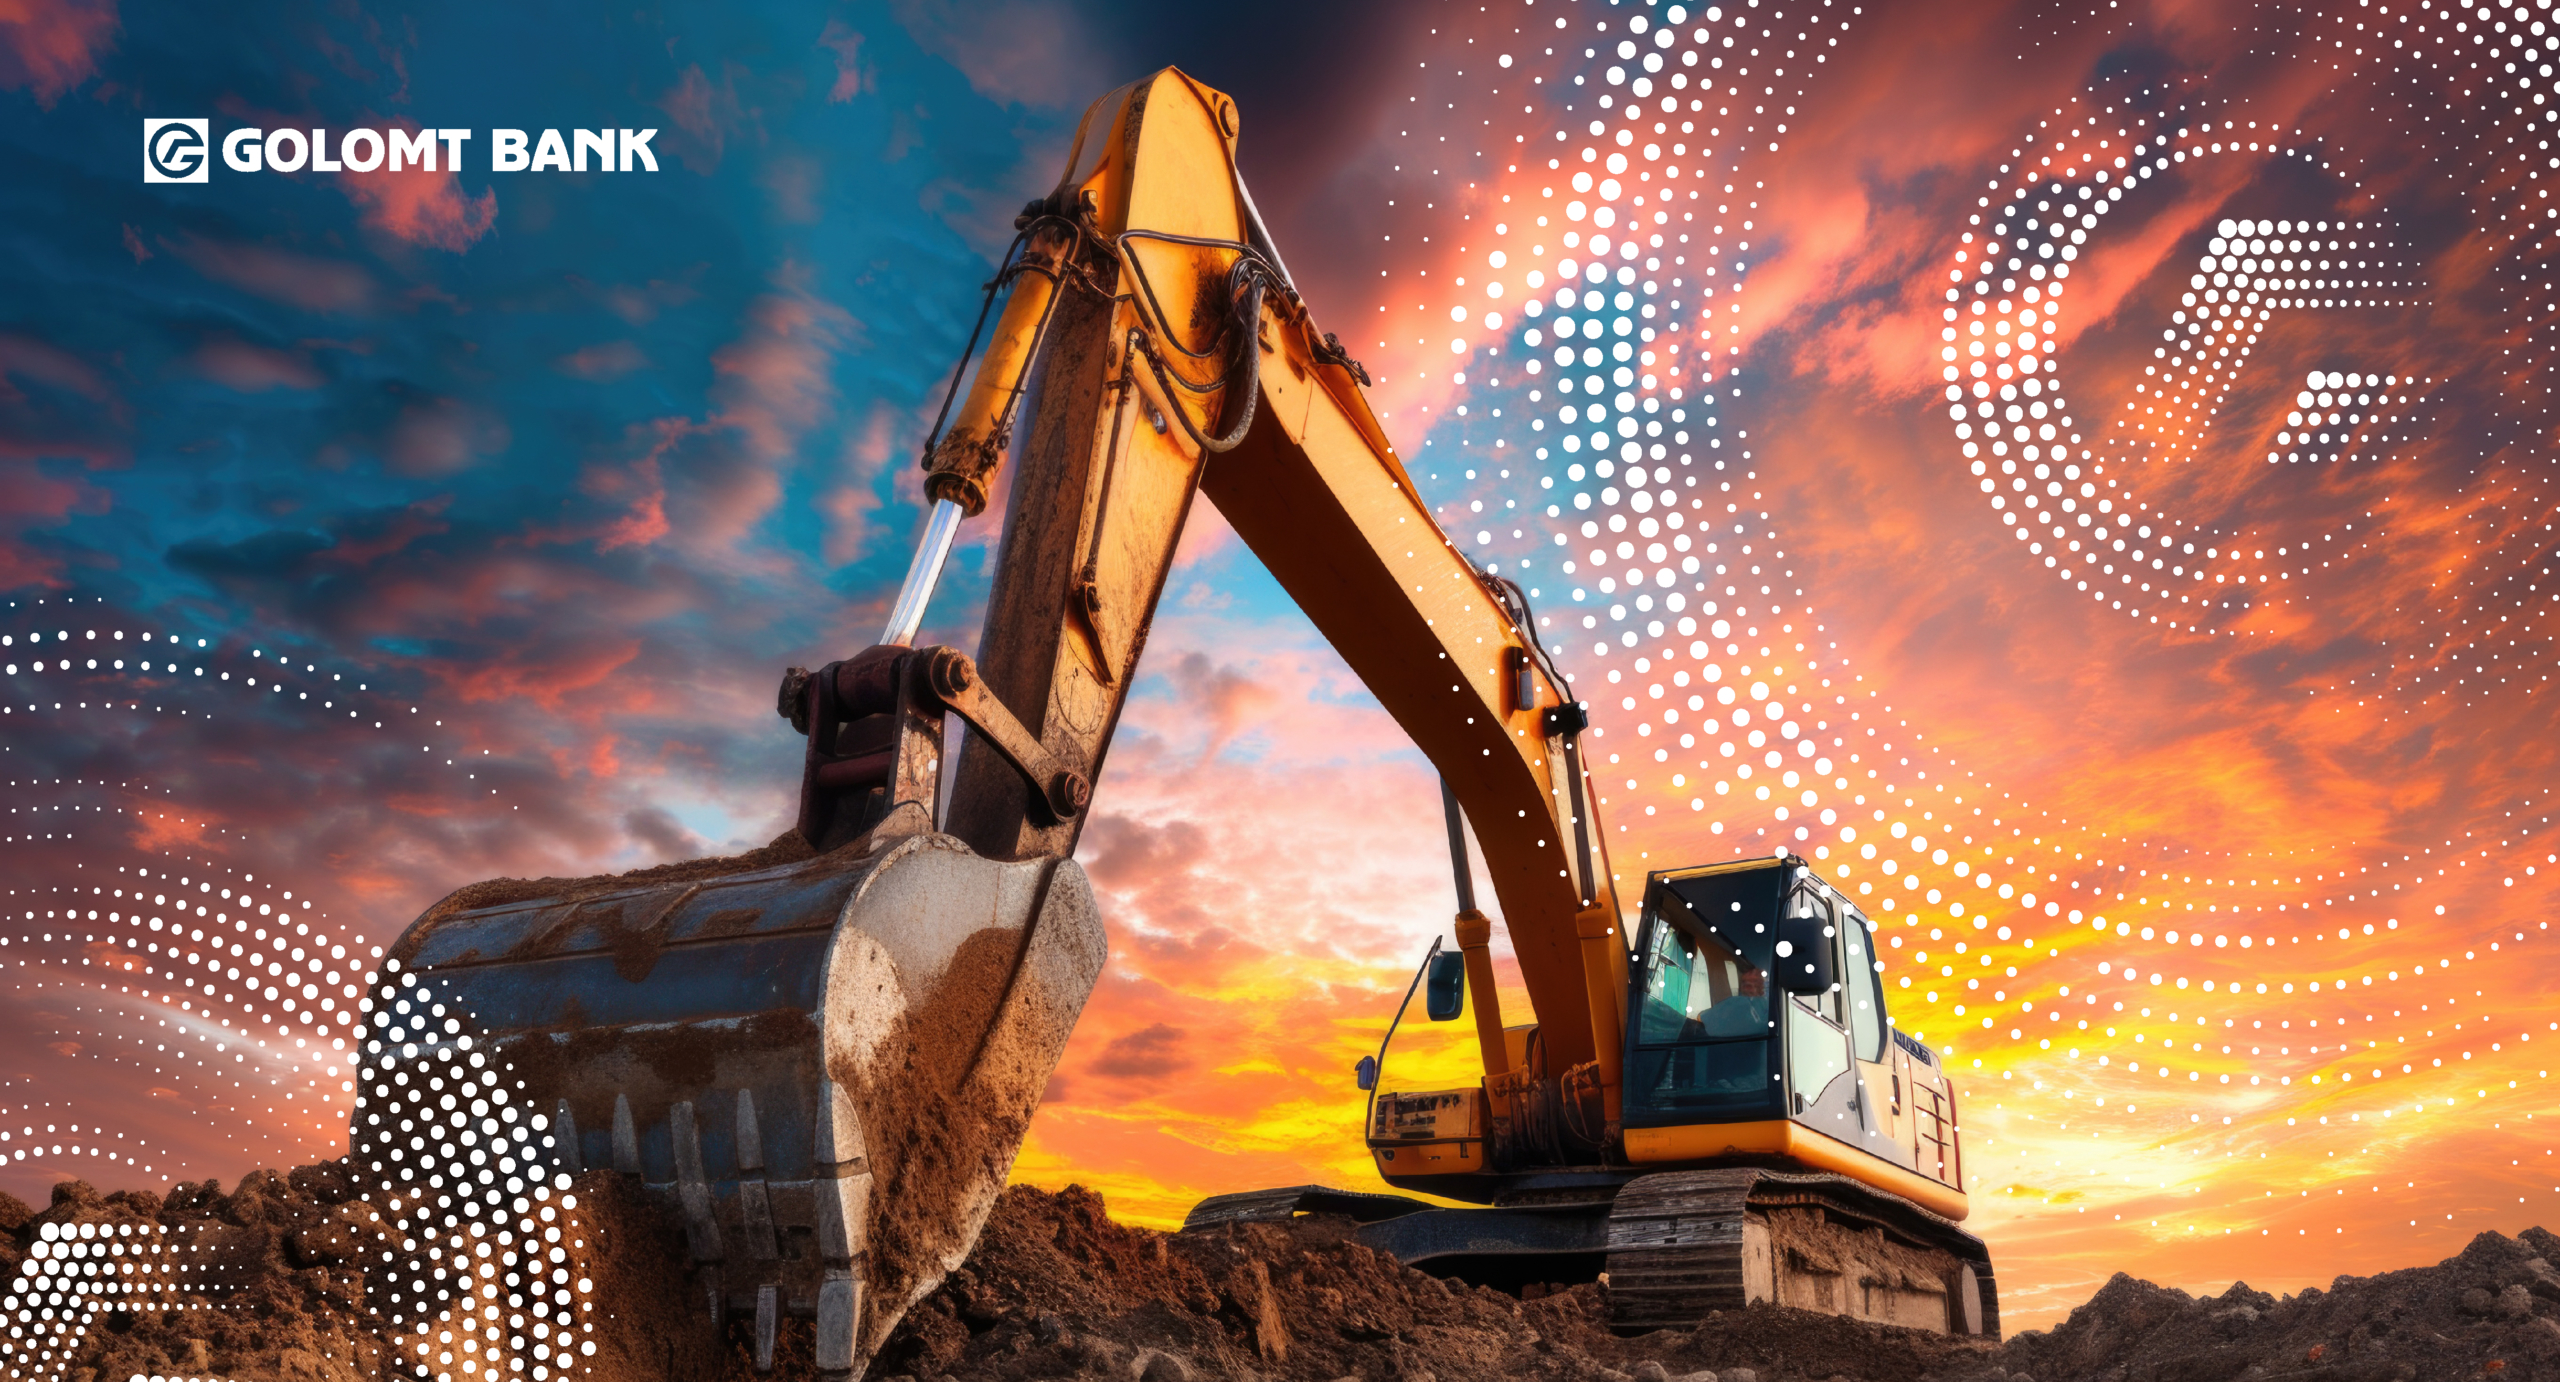 Financial leasing of heavy machinery and equipment